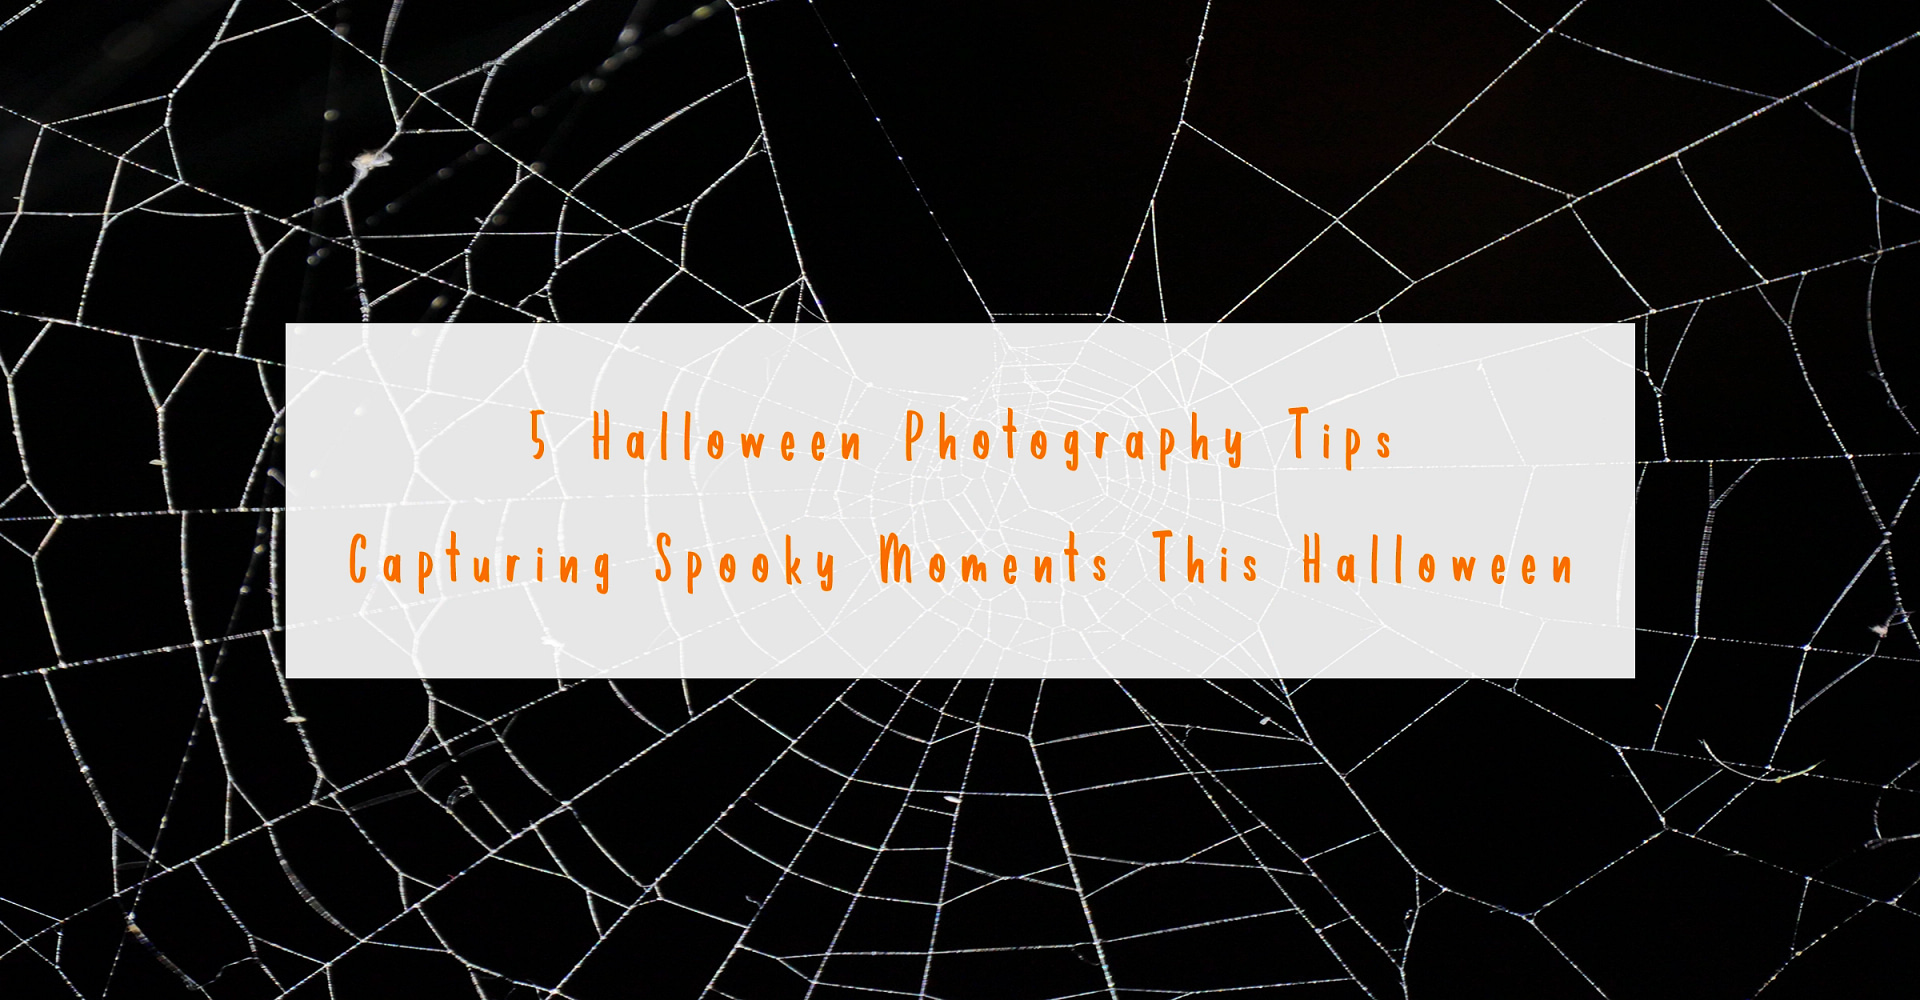 5 Halloween Photography Tips: Capturing Spooky Moments This Halloween